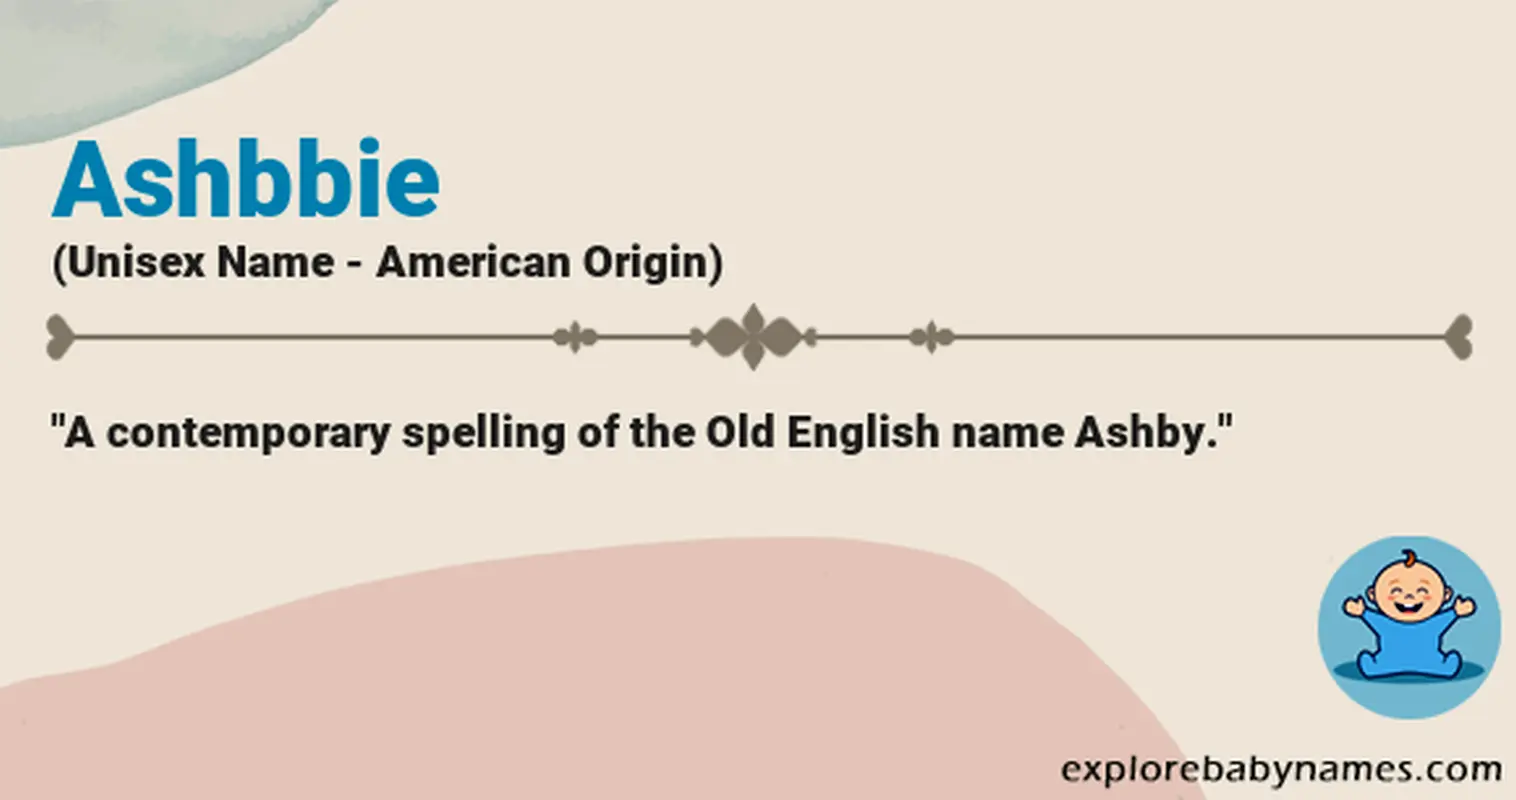 Meaning of Ashbbie